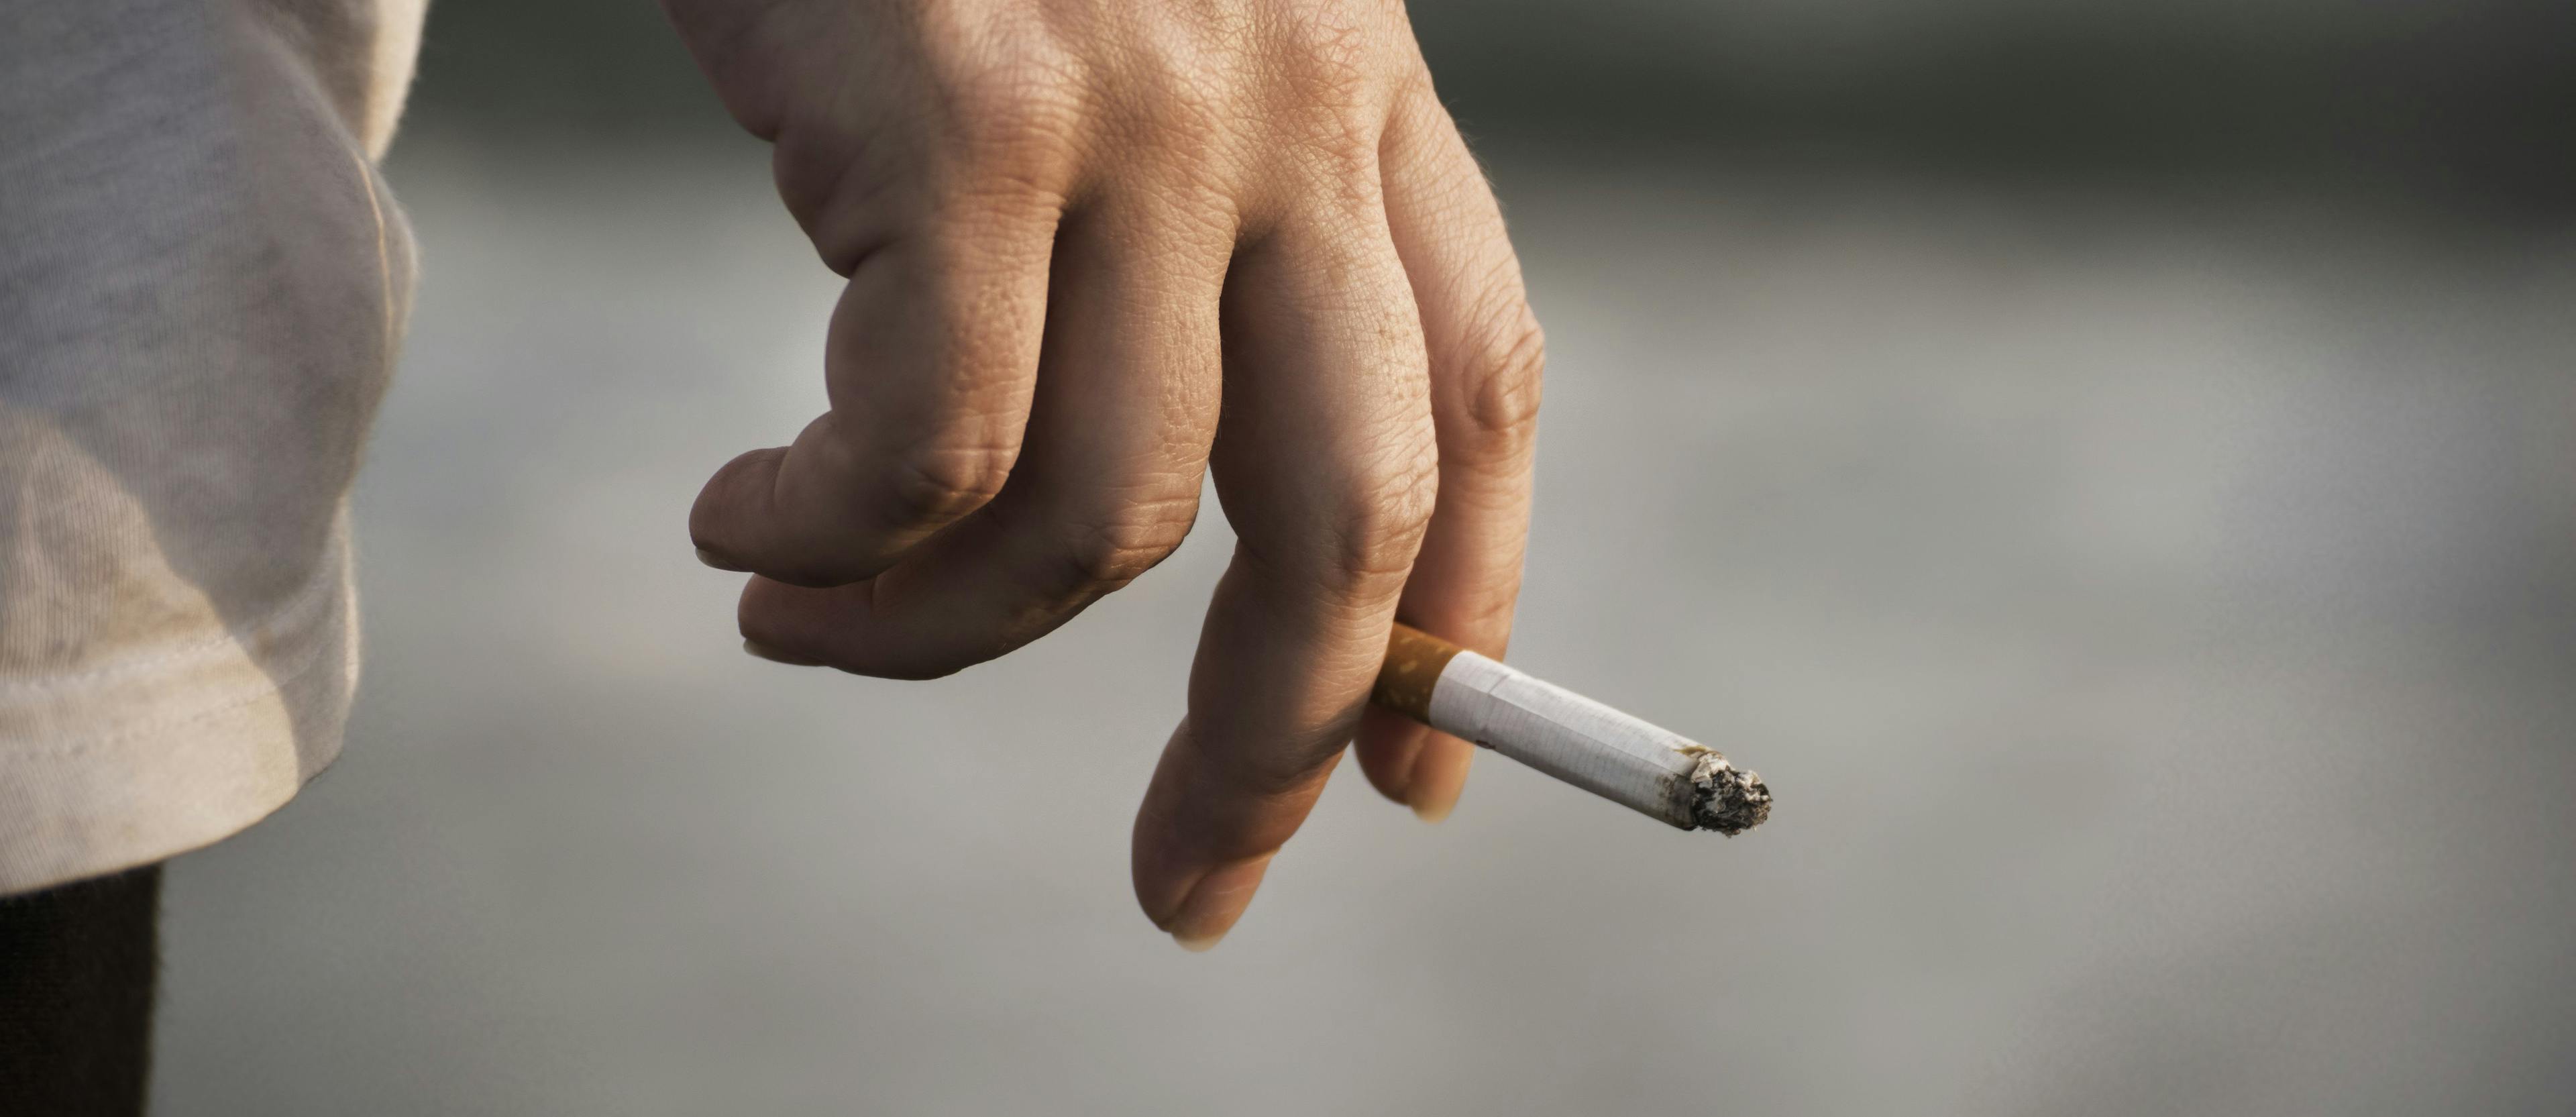 Smokers Remain Underscreened for Lung Cancer